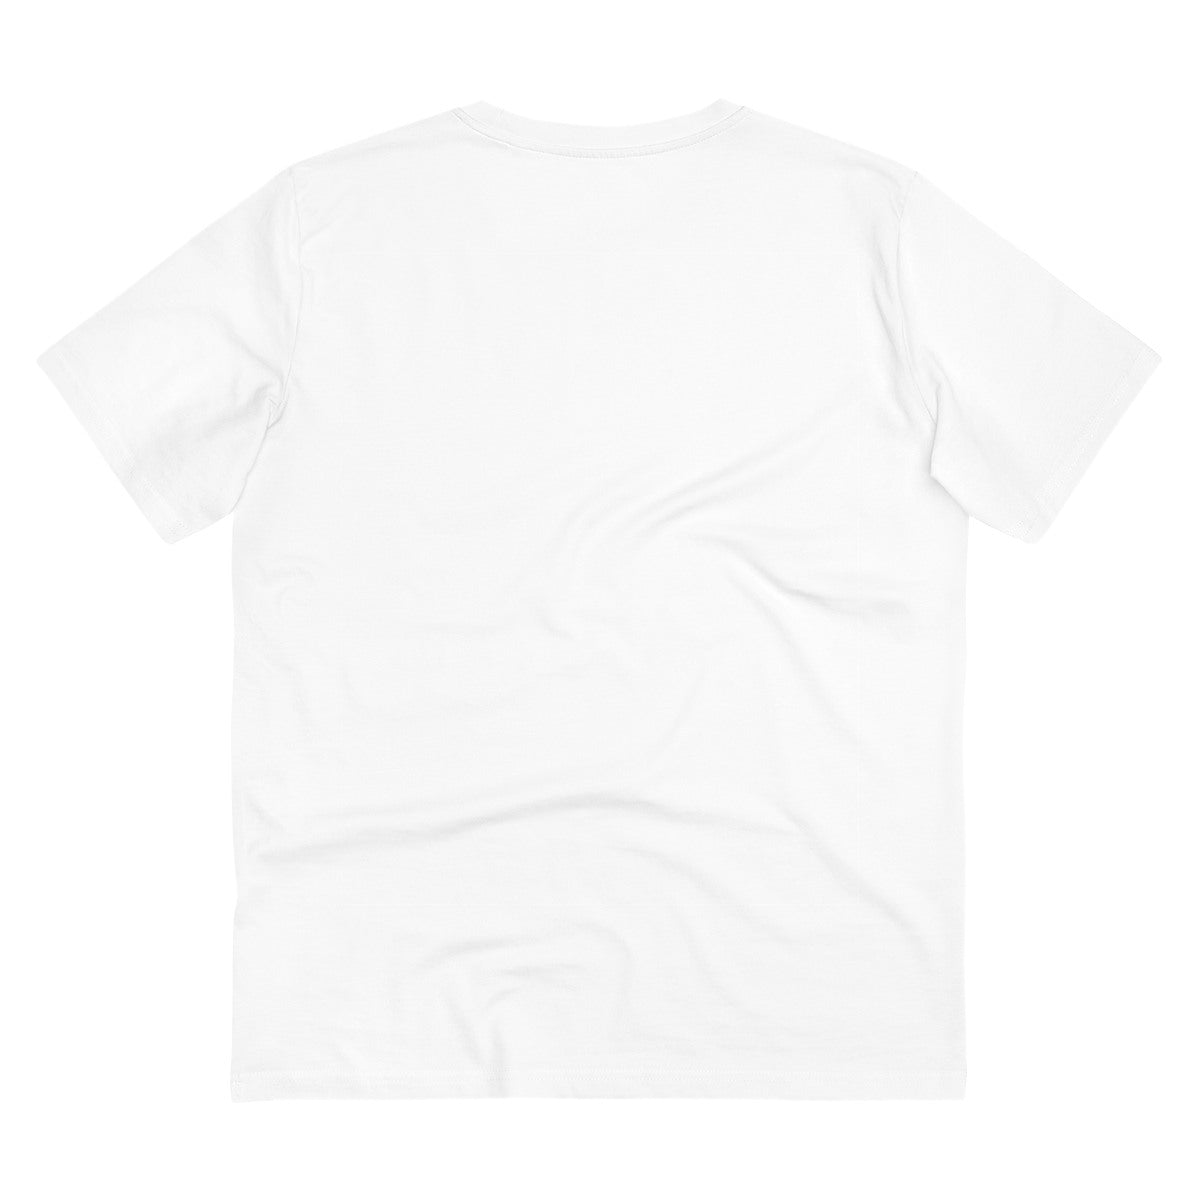 Men's PC Cotton 42nd Anniversary Printed T Shirt (Color: White, Thread Count: 180GSM) - GillKart